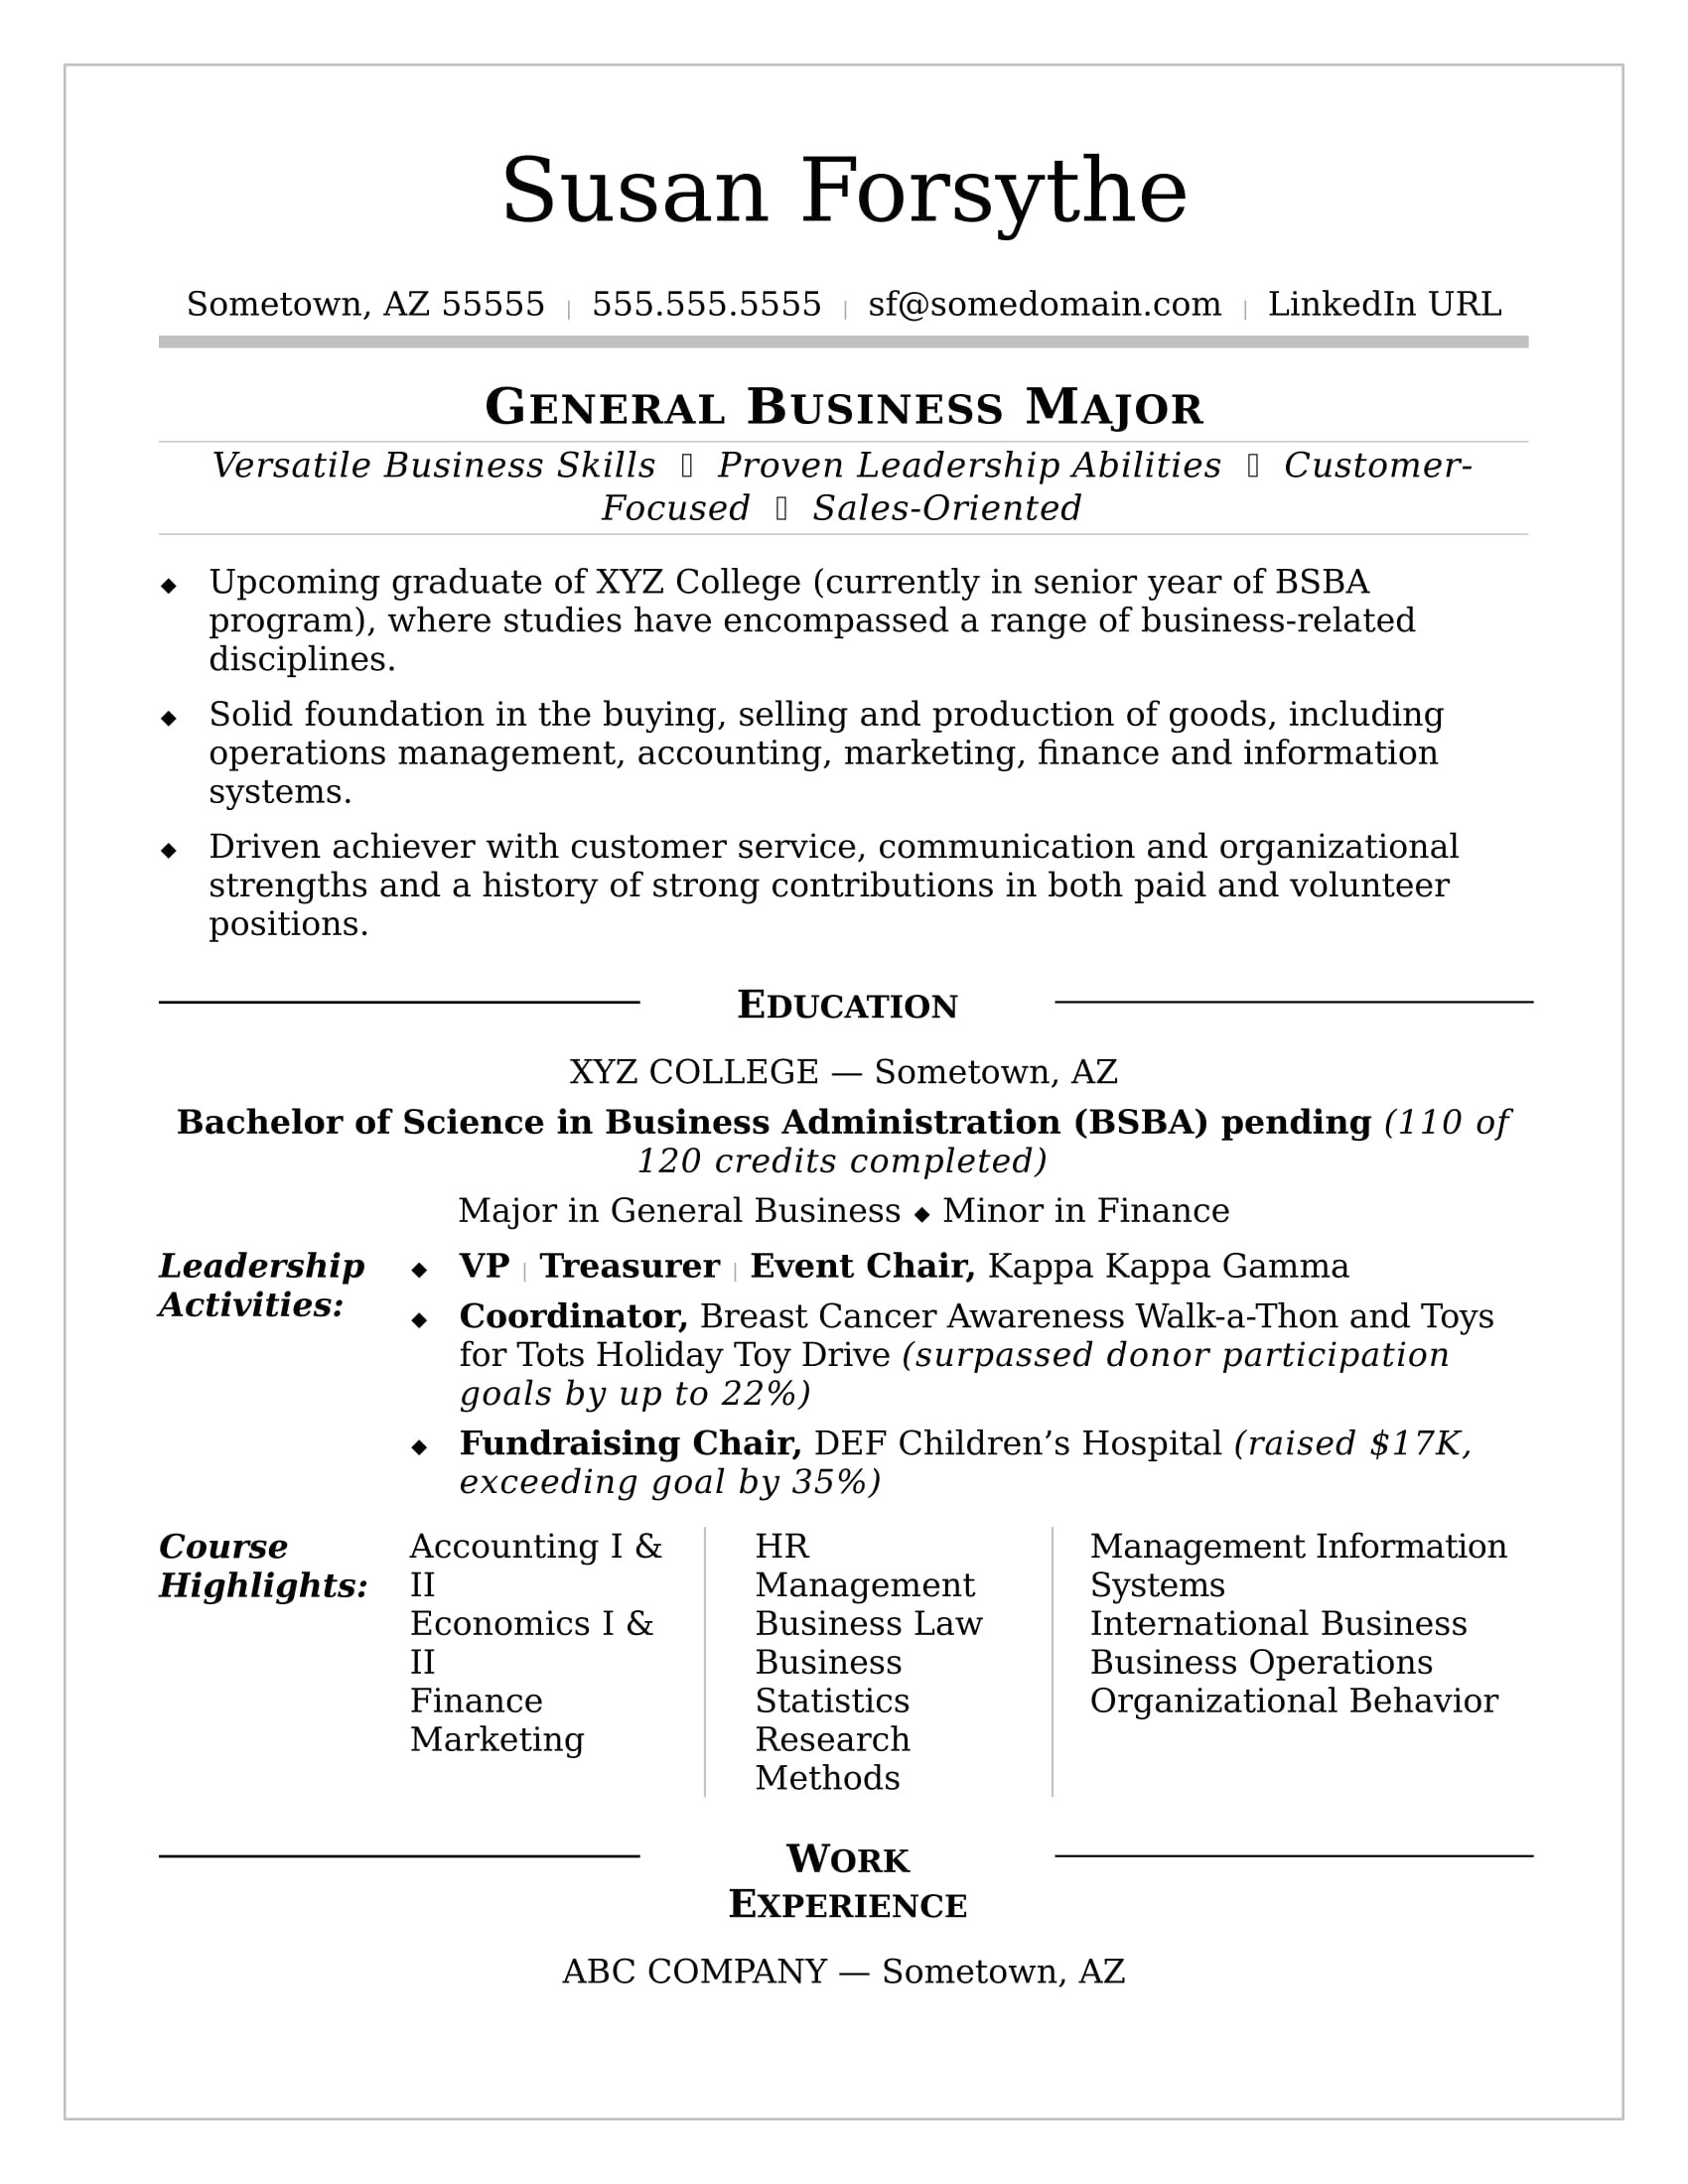 Sample Of Resume for Students In College College Resume Sample Monster Com